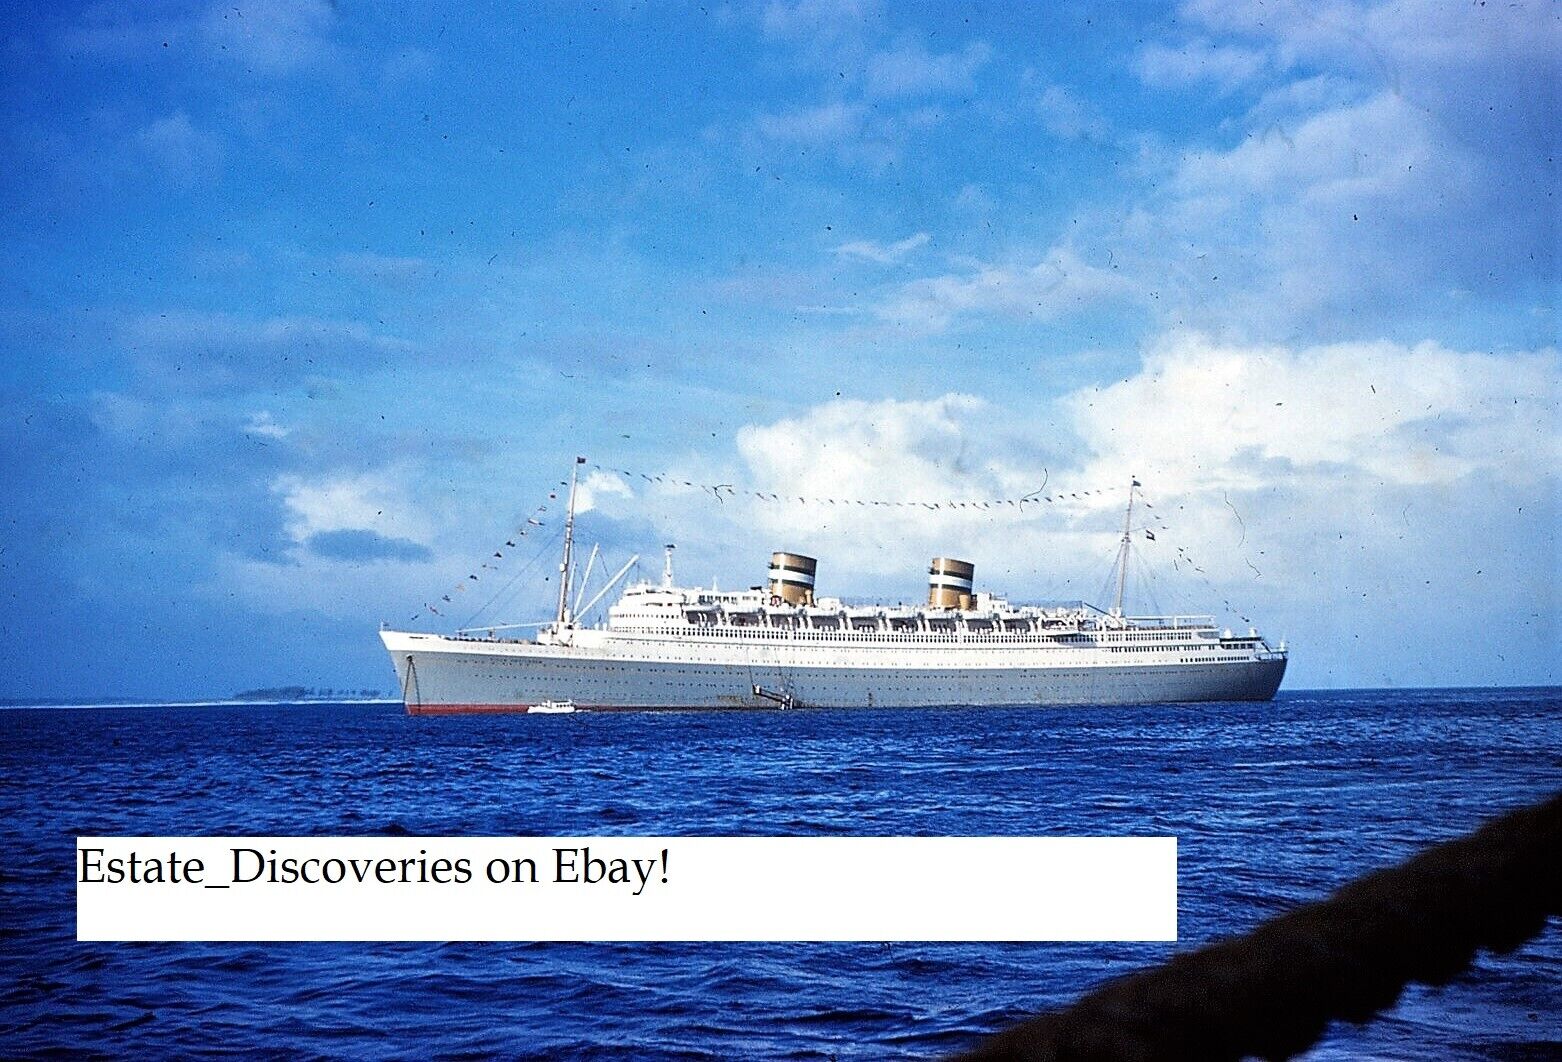 Vintage Ocean Liners, Ships, Boats, Cruises, Photos from Slides Sent Digitally 